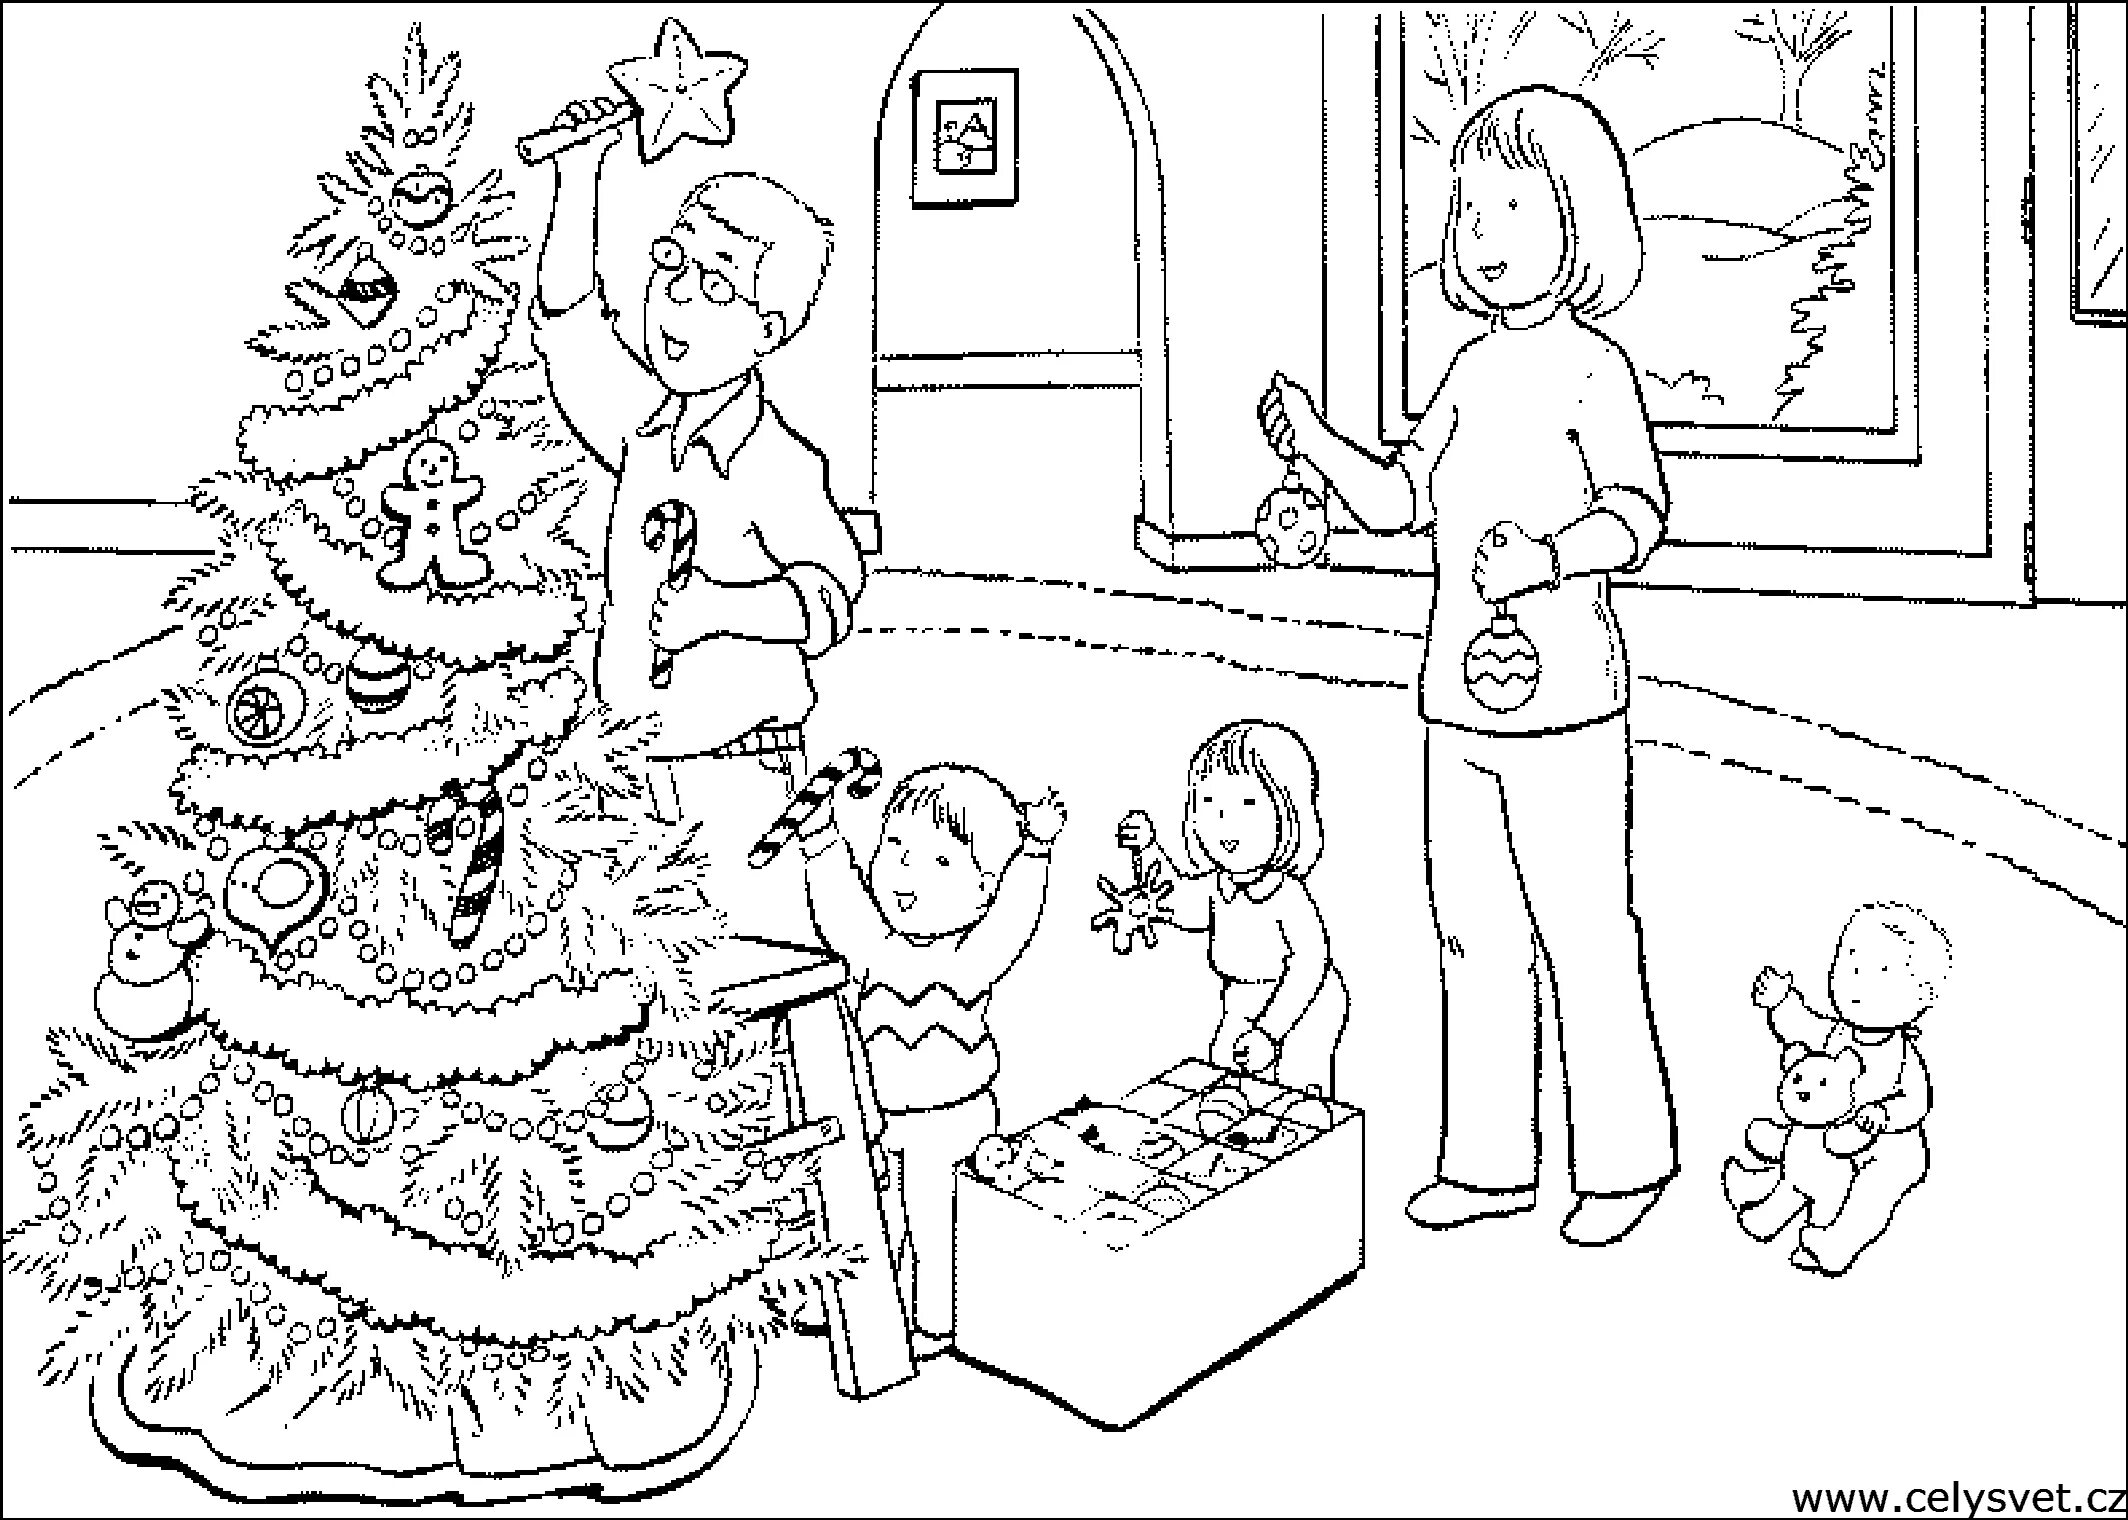 Exquisite Christmas family coloring book